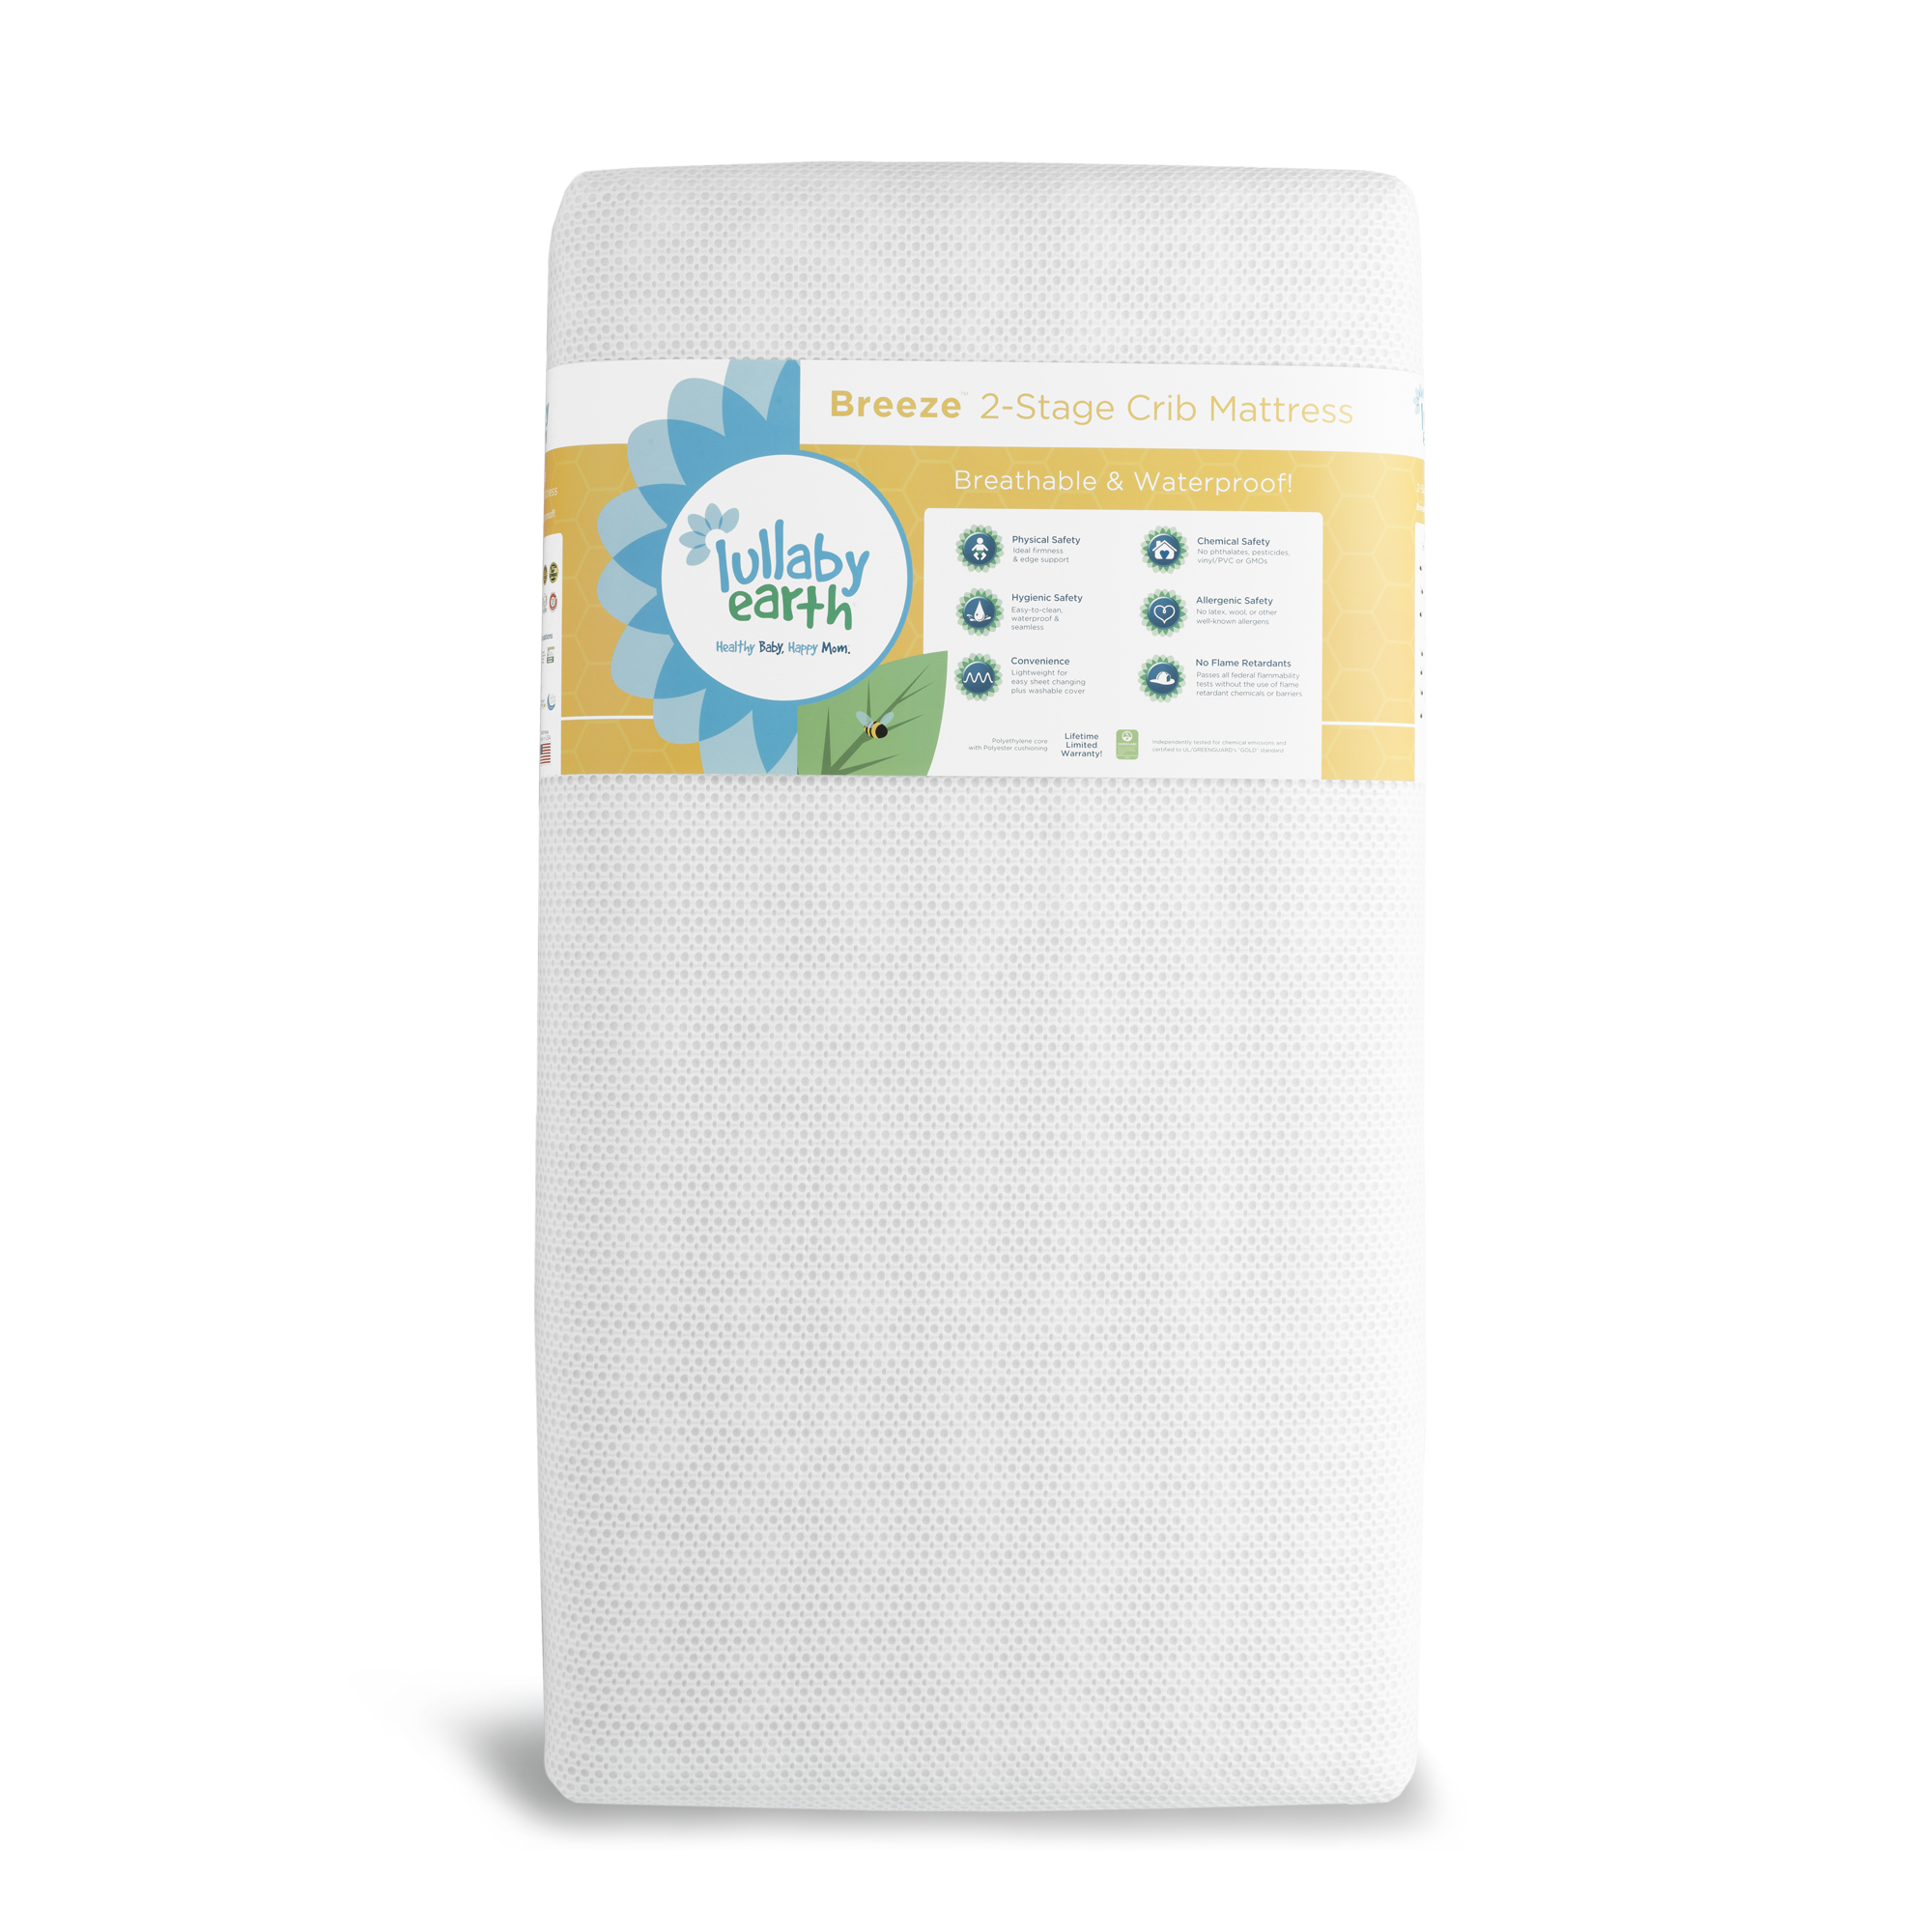 Lullaby Earth Breeze 2-Stage Crib Mattress